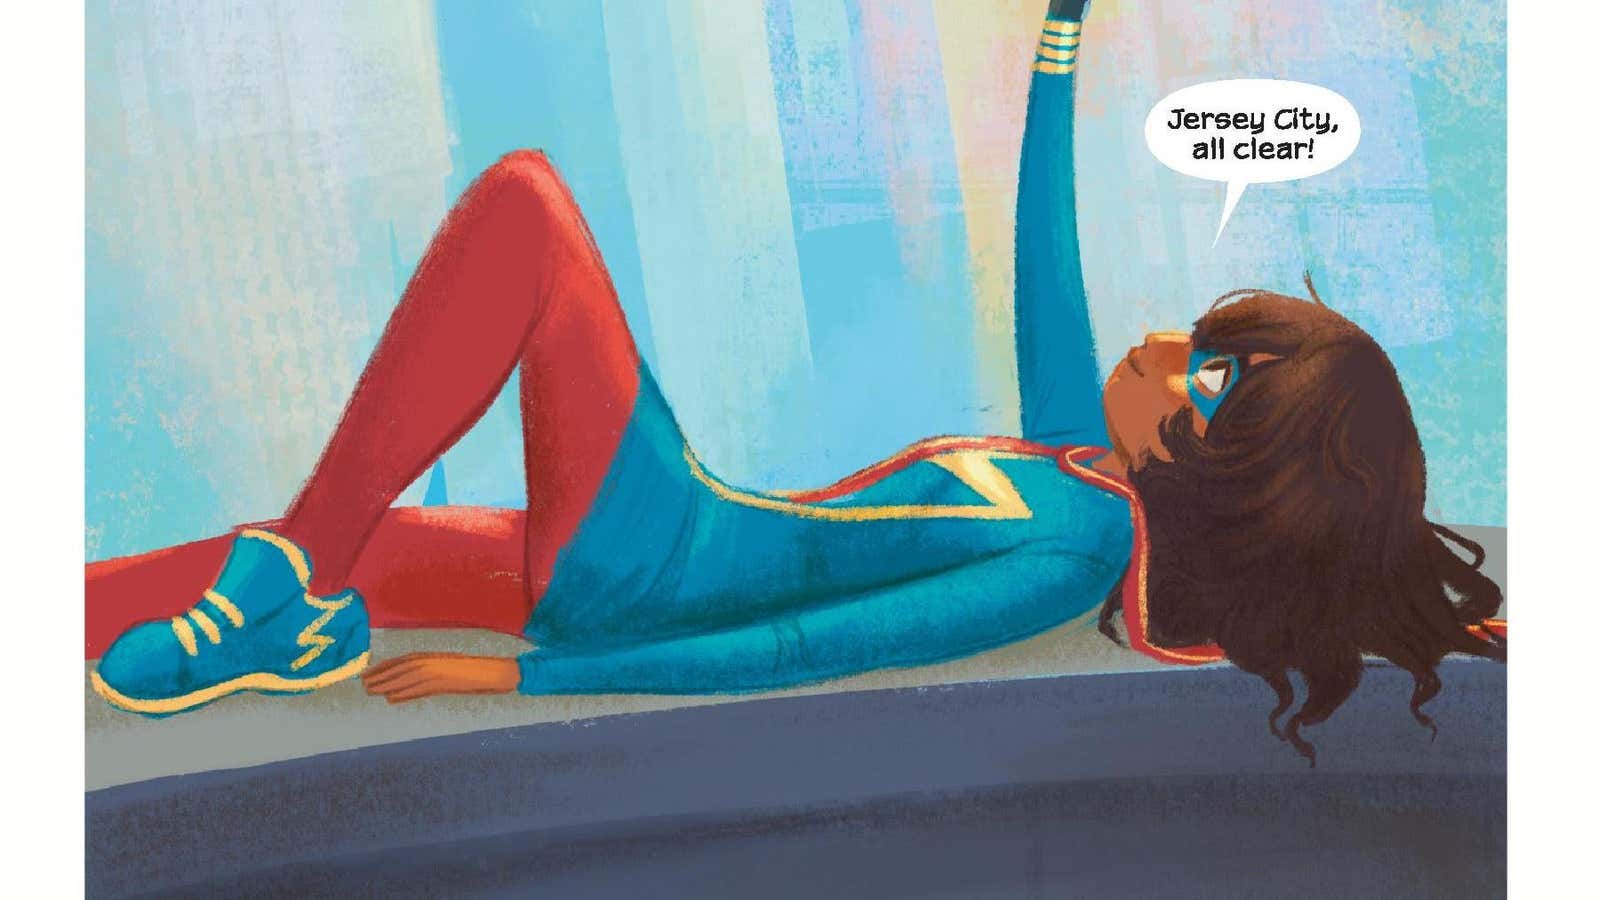 Kamala Khan takes on the internet in <i>Ms. Marvel: Stretched Thin</i>